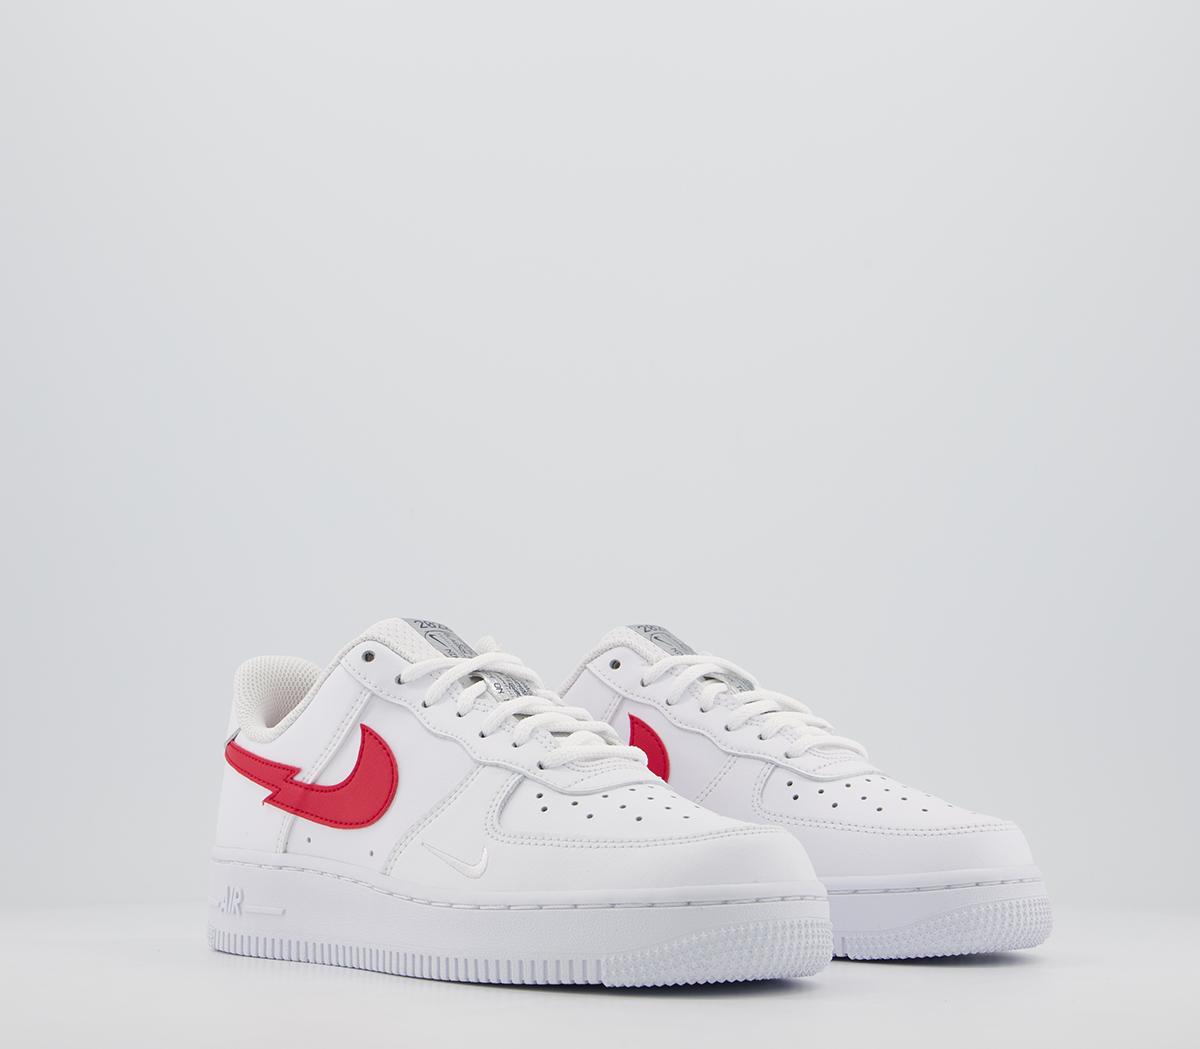 Nike Nike Air Force 1 Trainers Euro Championship 20 Pack - Gift Guide